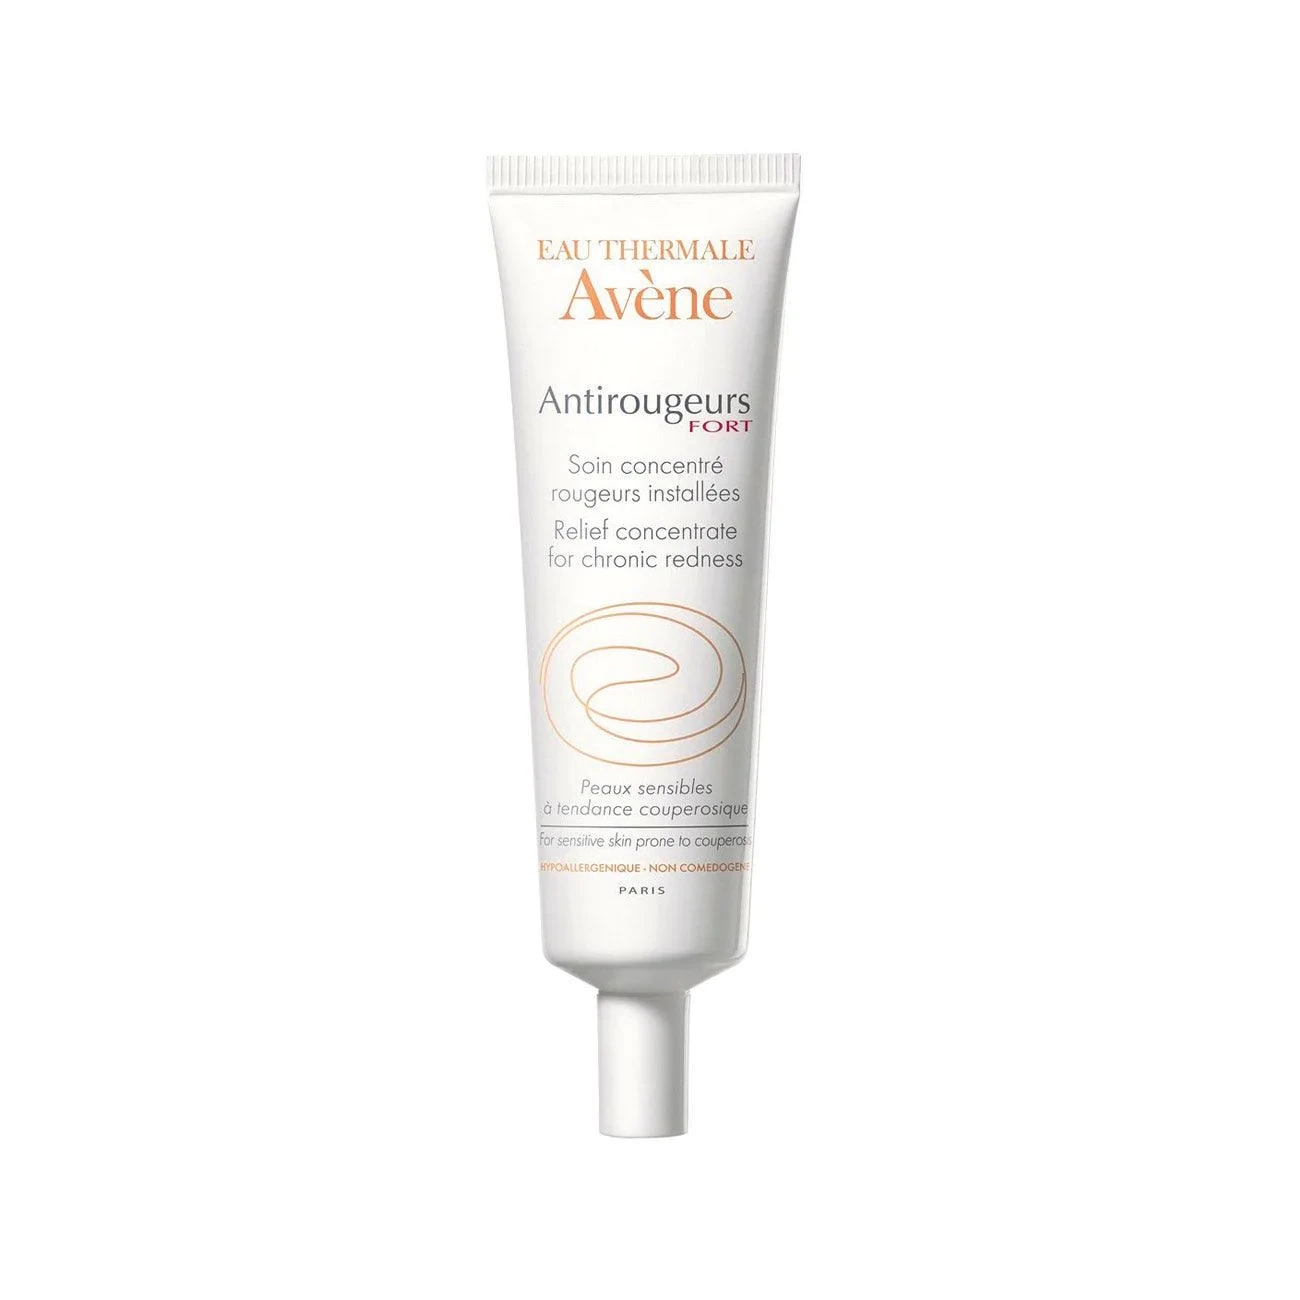 AVÈNE - Antirougeurs Fort Relief Concentrate for Chronic Redness - Sensitive Skin Prone to Couperosis